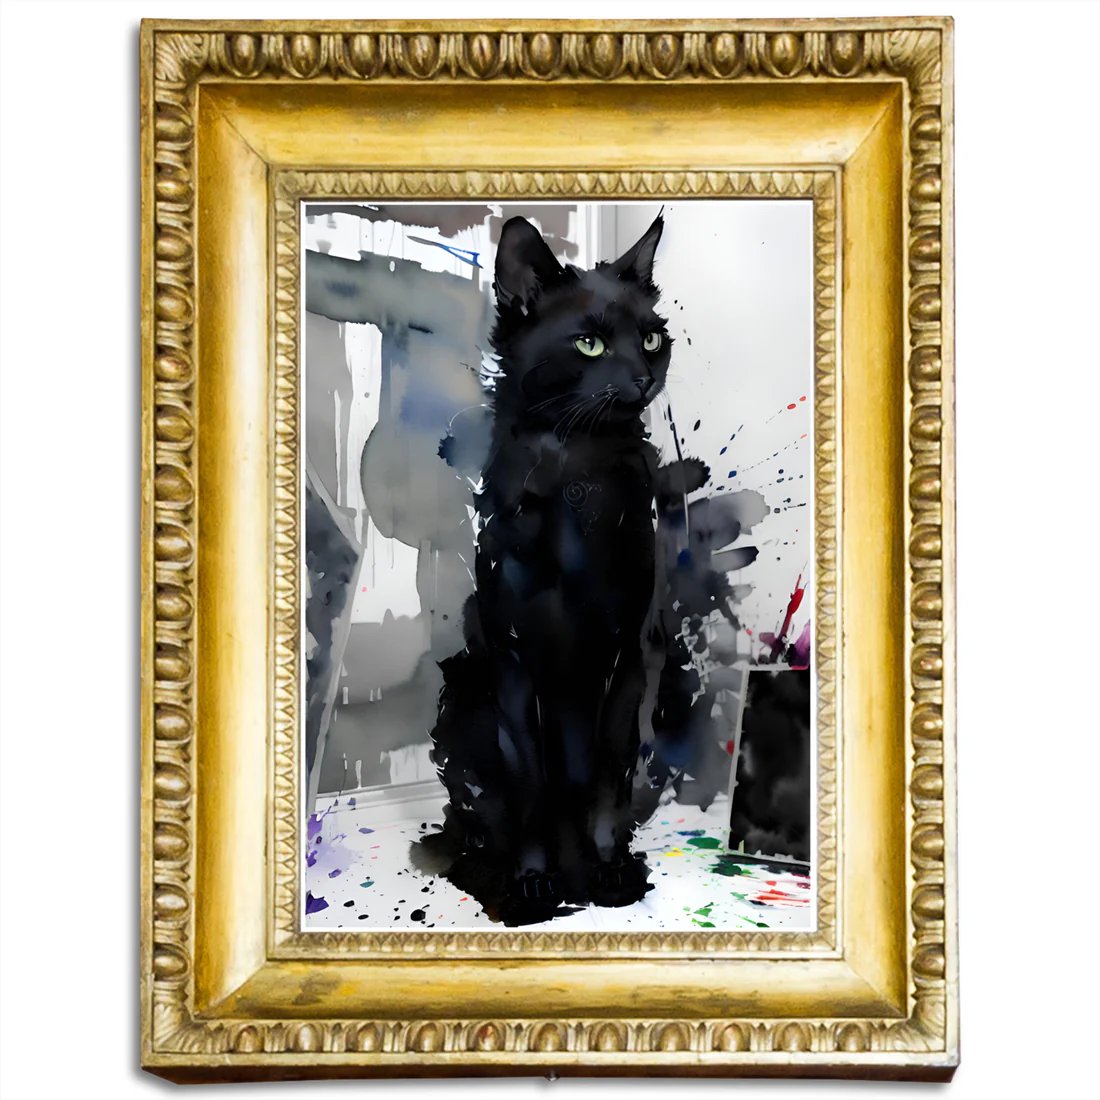 'Rocky' is a beautiful gift for your loved one. This is my wonderful and most loved cat as a model. Perfect #gift for #catlover. #LimitedEdition #print #art #cat artcursor.com/products/rocky